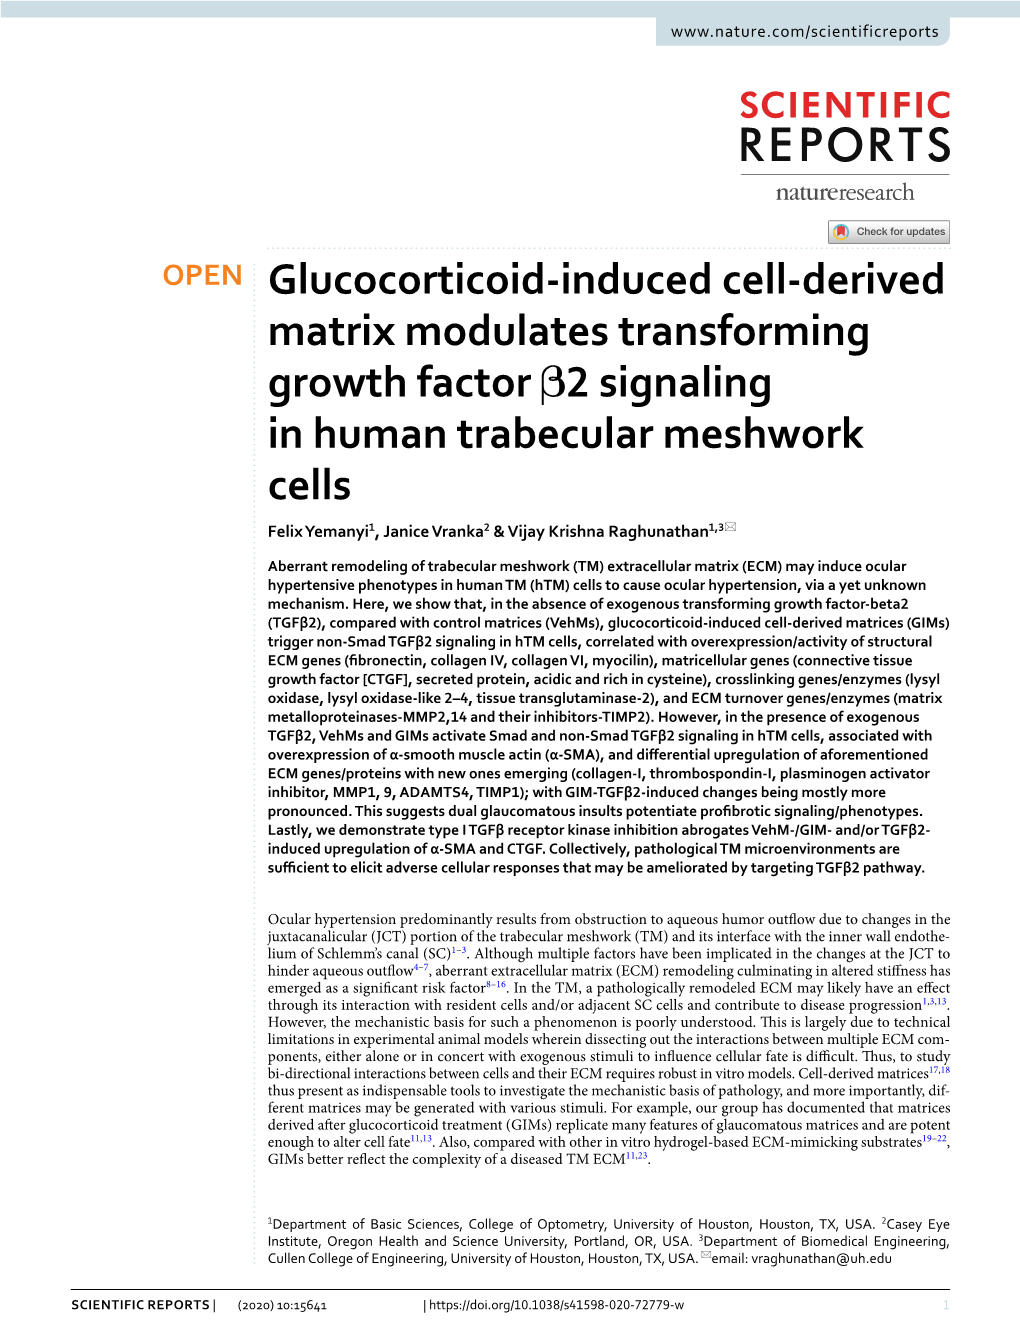 Glucocorticoid-Induced Cell-Derived Matrix Modulates Transforming